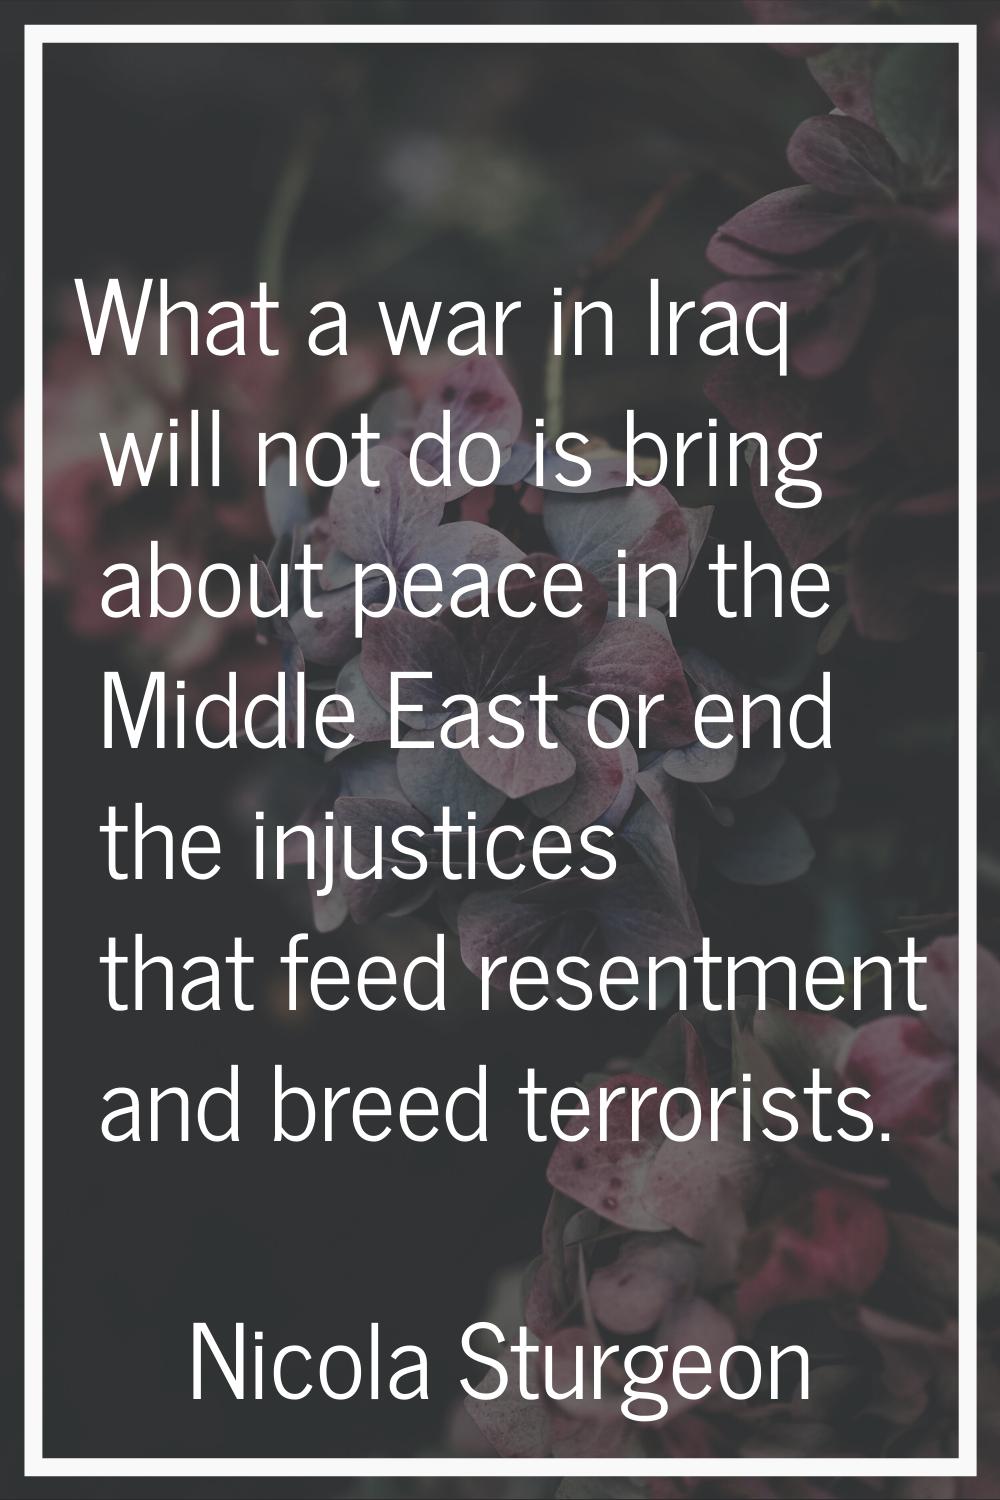 What a war in Iraq will not do is bring about peace in the Middle East or end the injustices that f